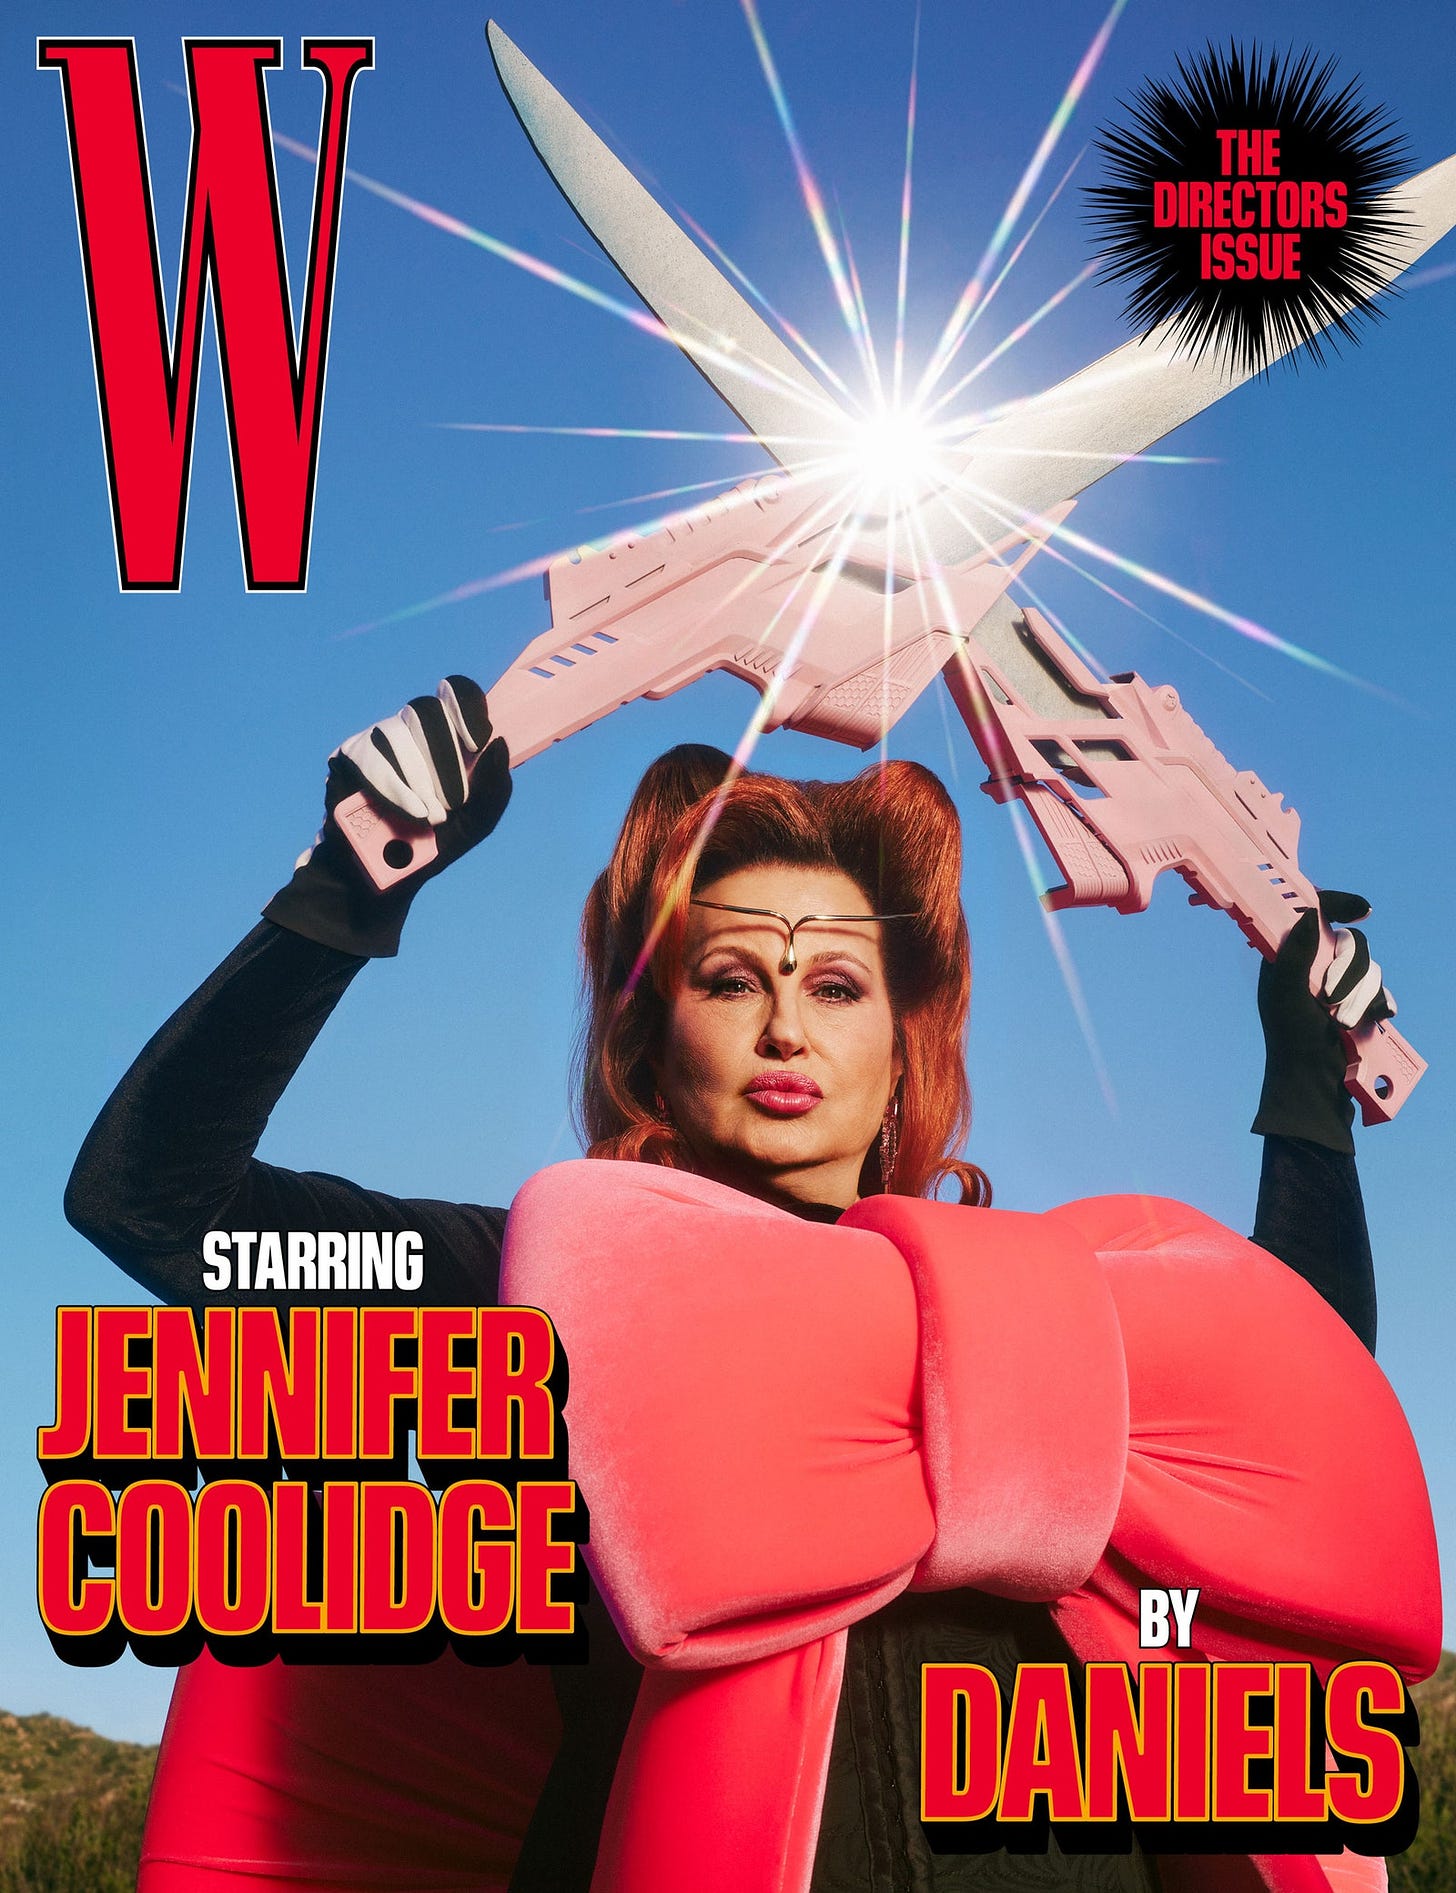 W Mag's Jennifer Coolidge Cover by The Daniels Is Camp At Its Finest | Them